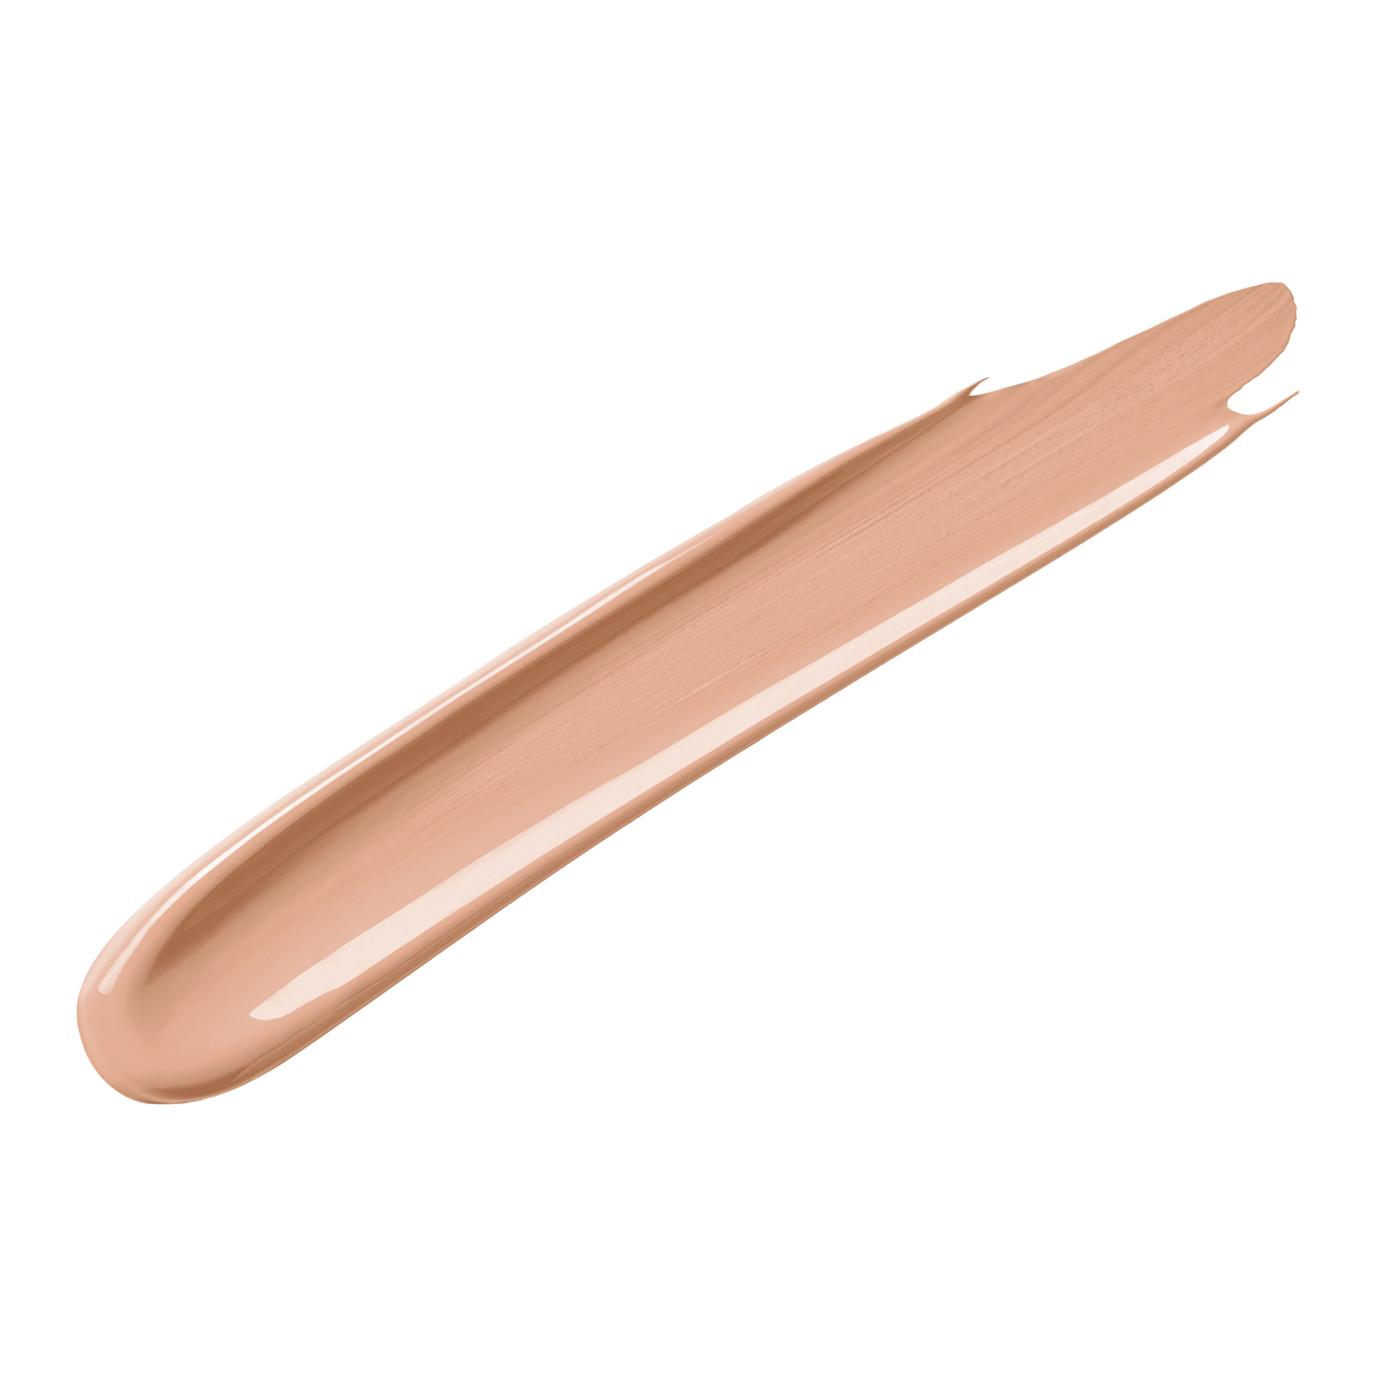 Covergirl Clean Invisible Concealer - Classic Ivory; image 8 of 15